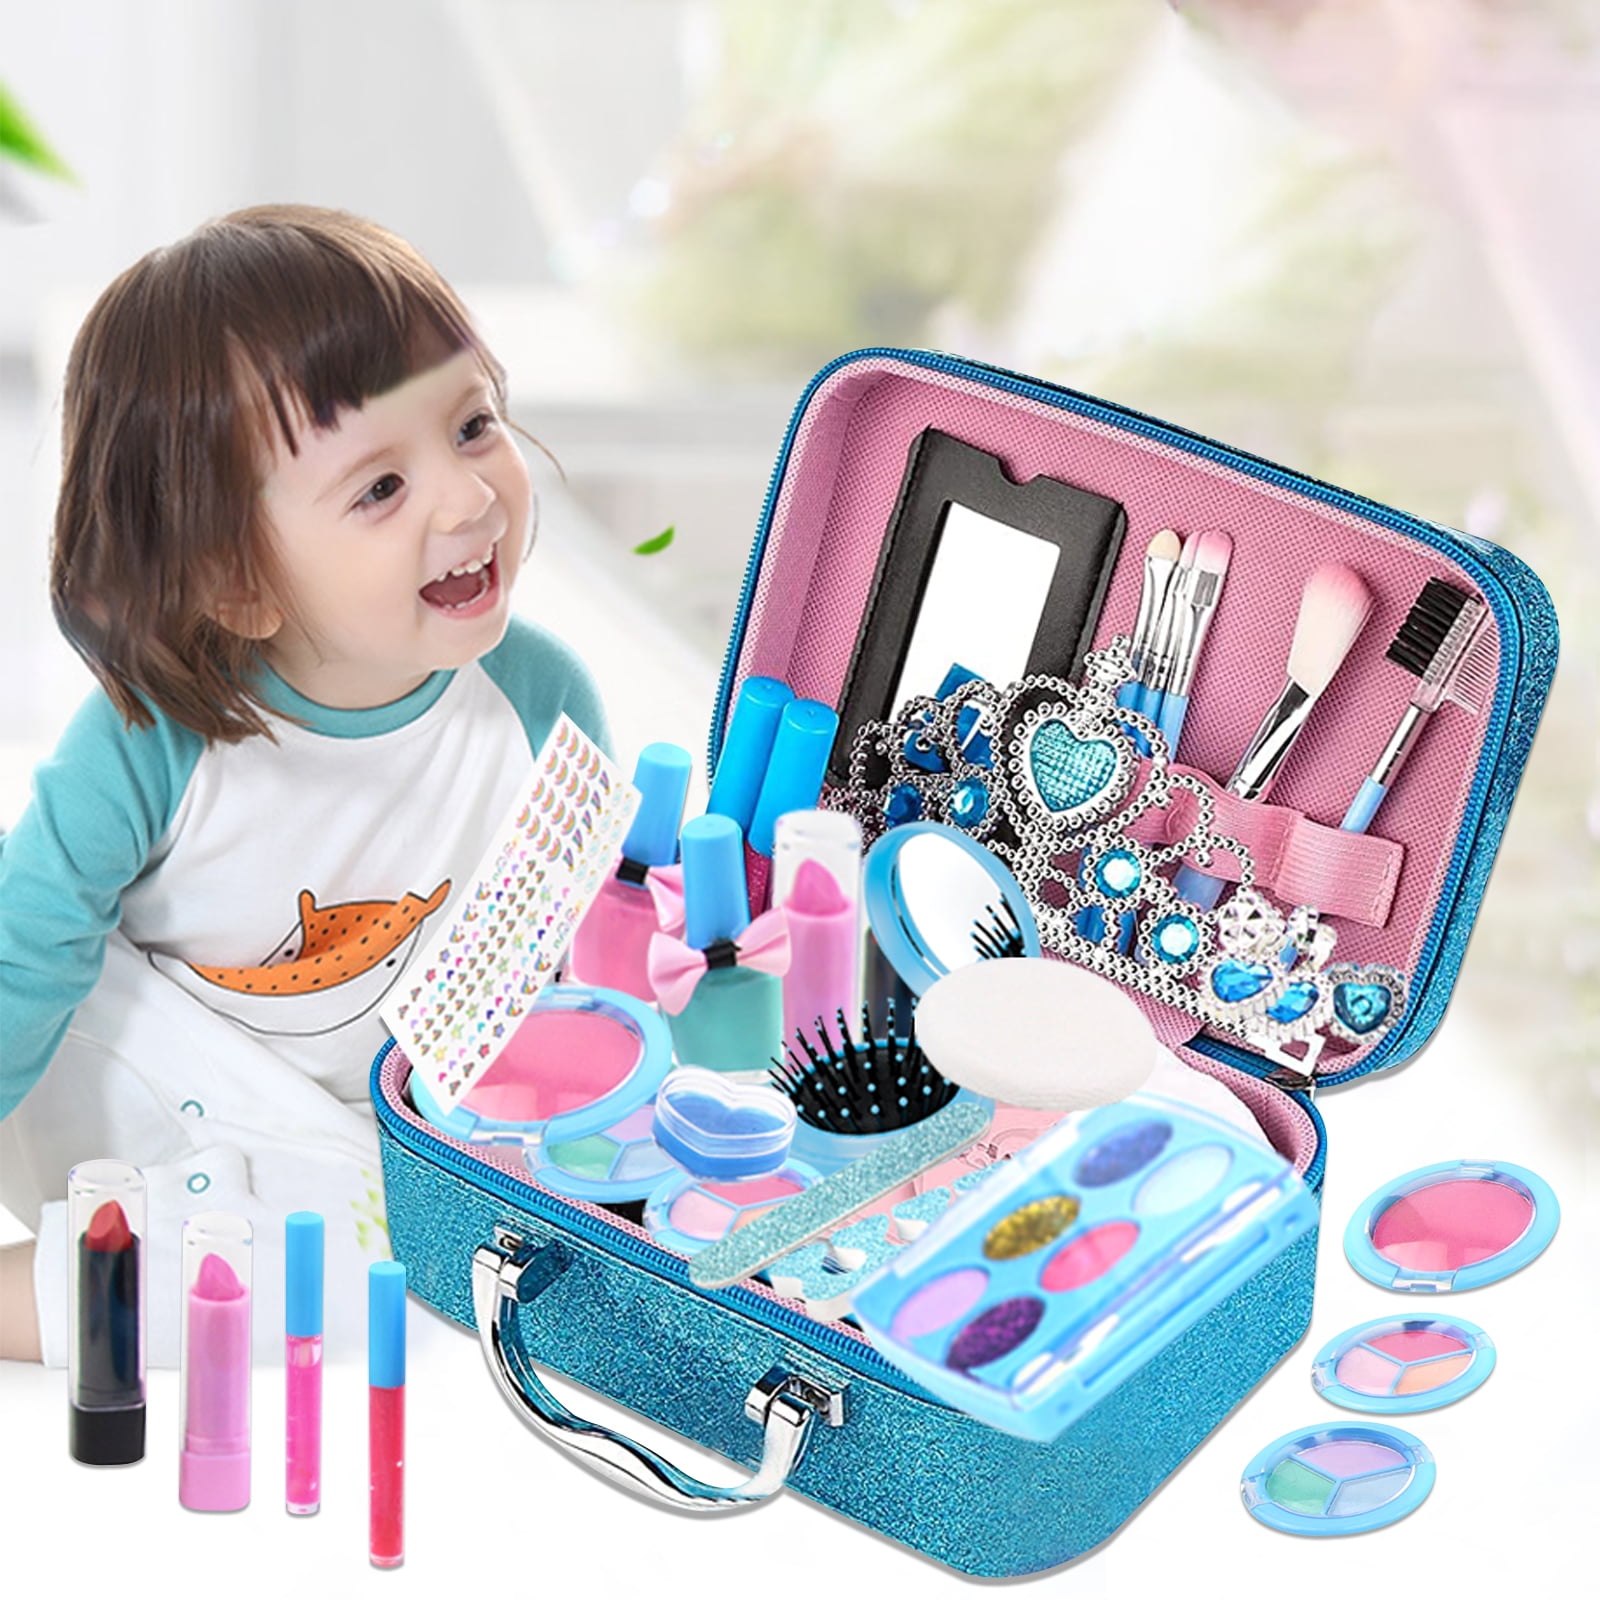 KIZSBRO Kids Makeup Kit for Girls, Washable Makeup Kit for Little Girls Princess Real Cosmetic Beauty Set, Gifts for Toddles Girl Pretend Play, Frozen